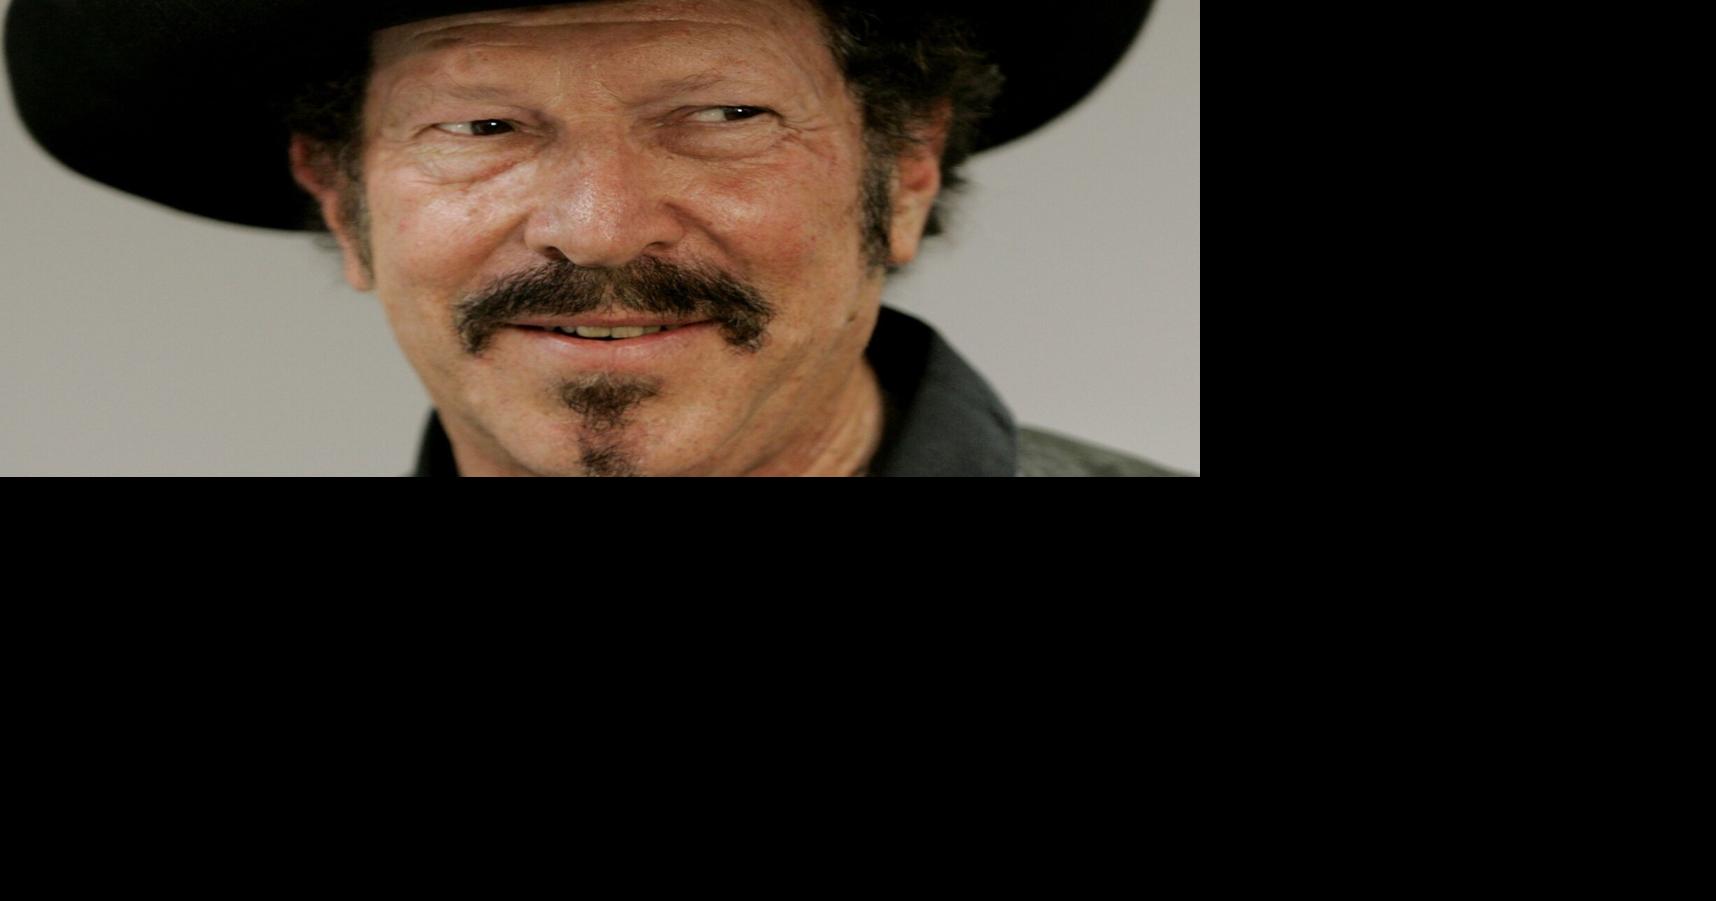 Singer, songwriter, provocateur and politician Kinky Friedman dies at the age of 79